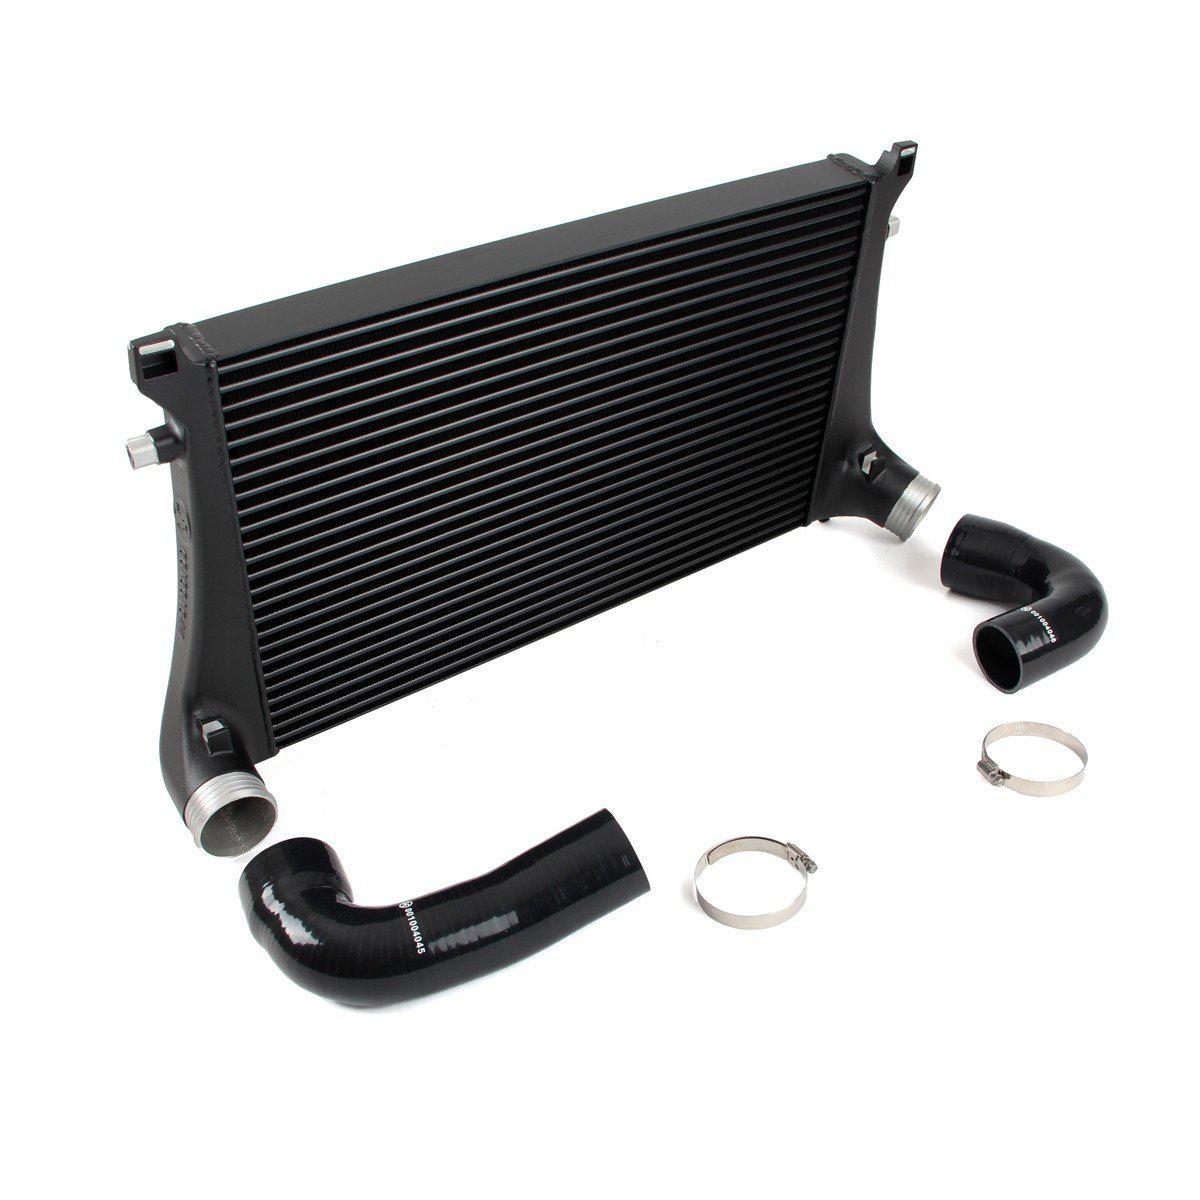 Wagner Tuning Competition Intercooler Kit For MKVII Volkswagen Golf/GTI/R &amp; 8V Audi A3/S3 1.8T/2.0T Ea888 Gen3-A Little Tuning Co